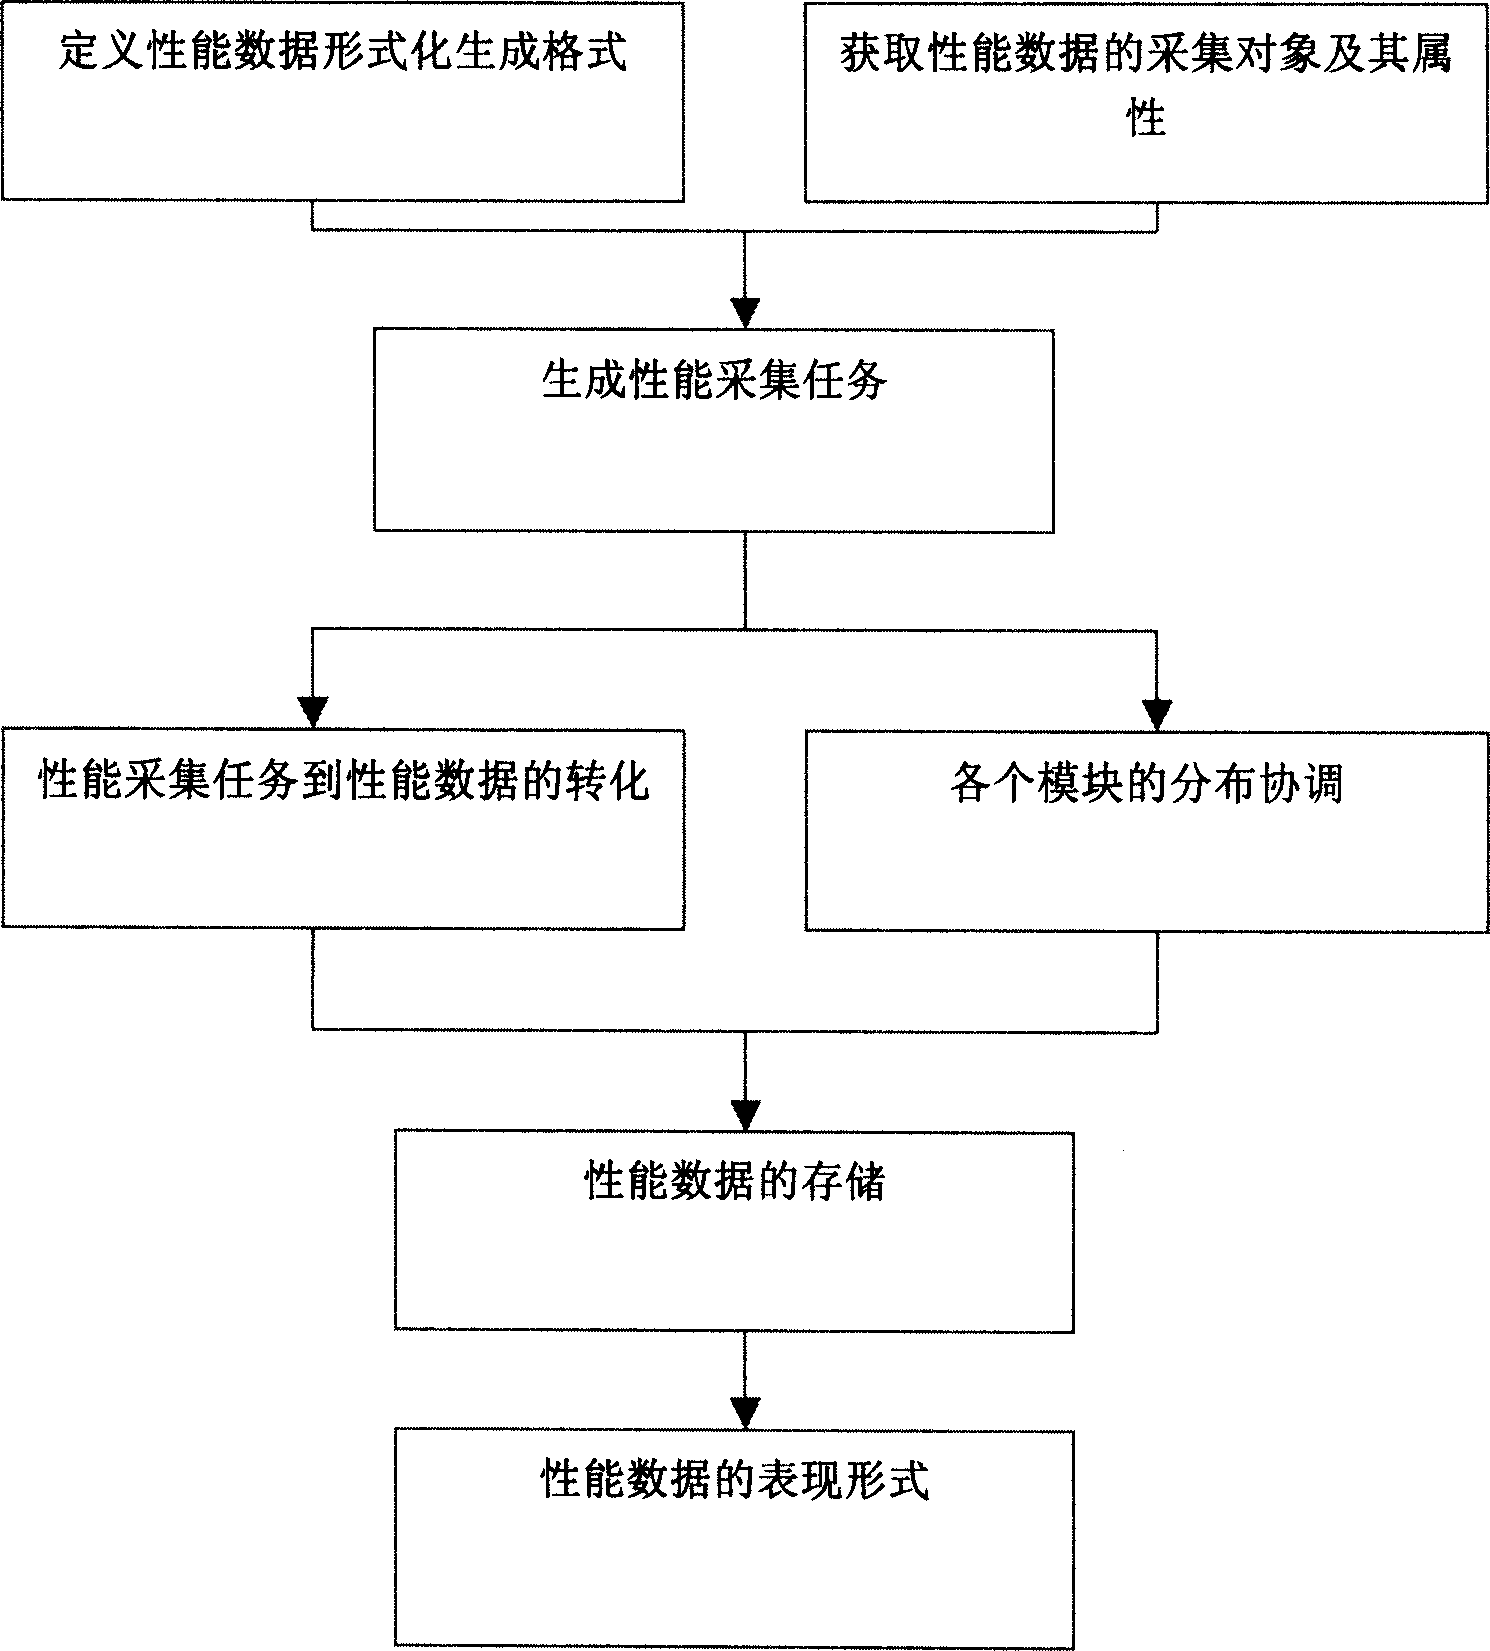 Distributed performance data acquisition method